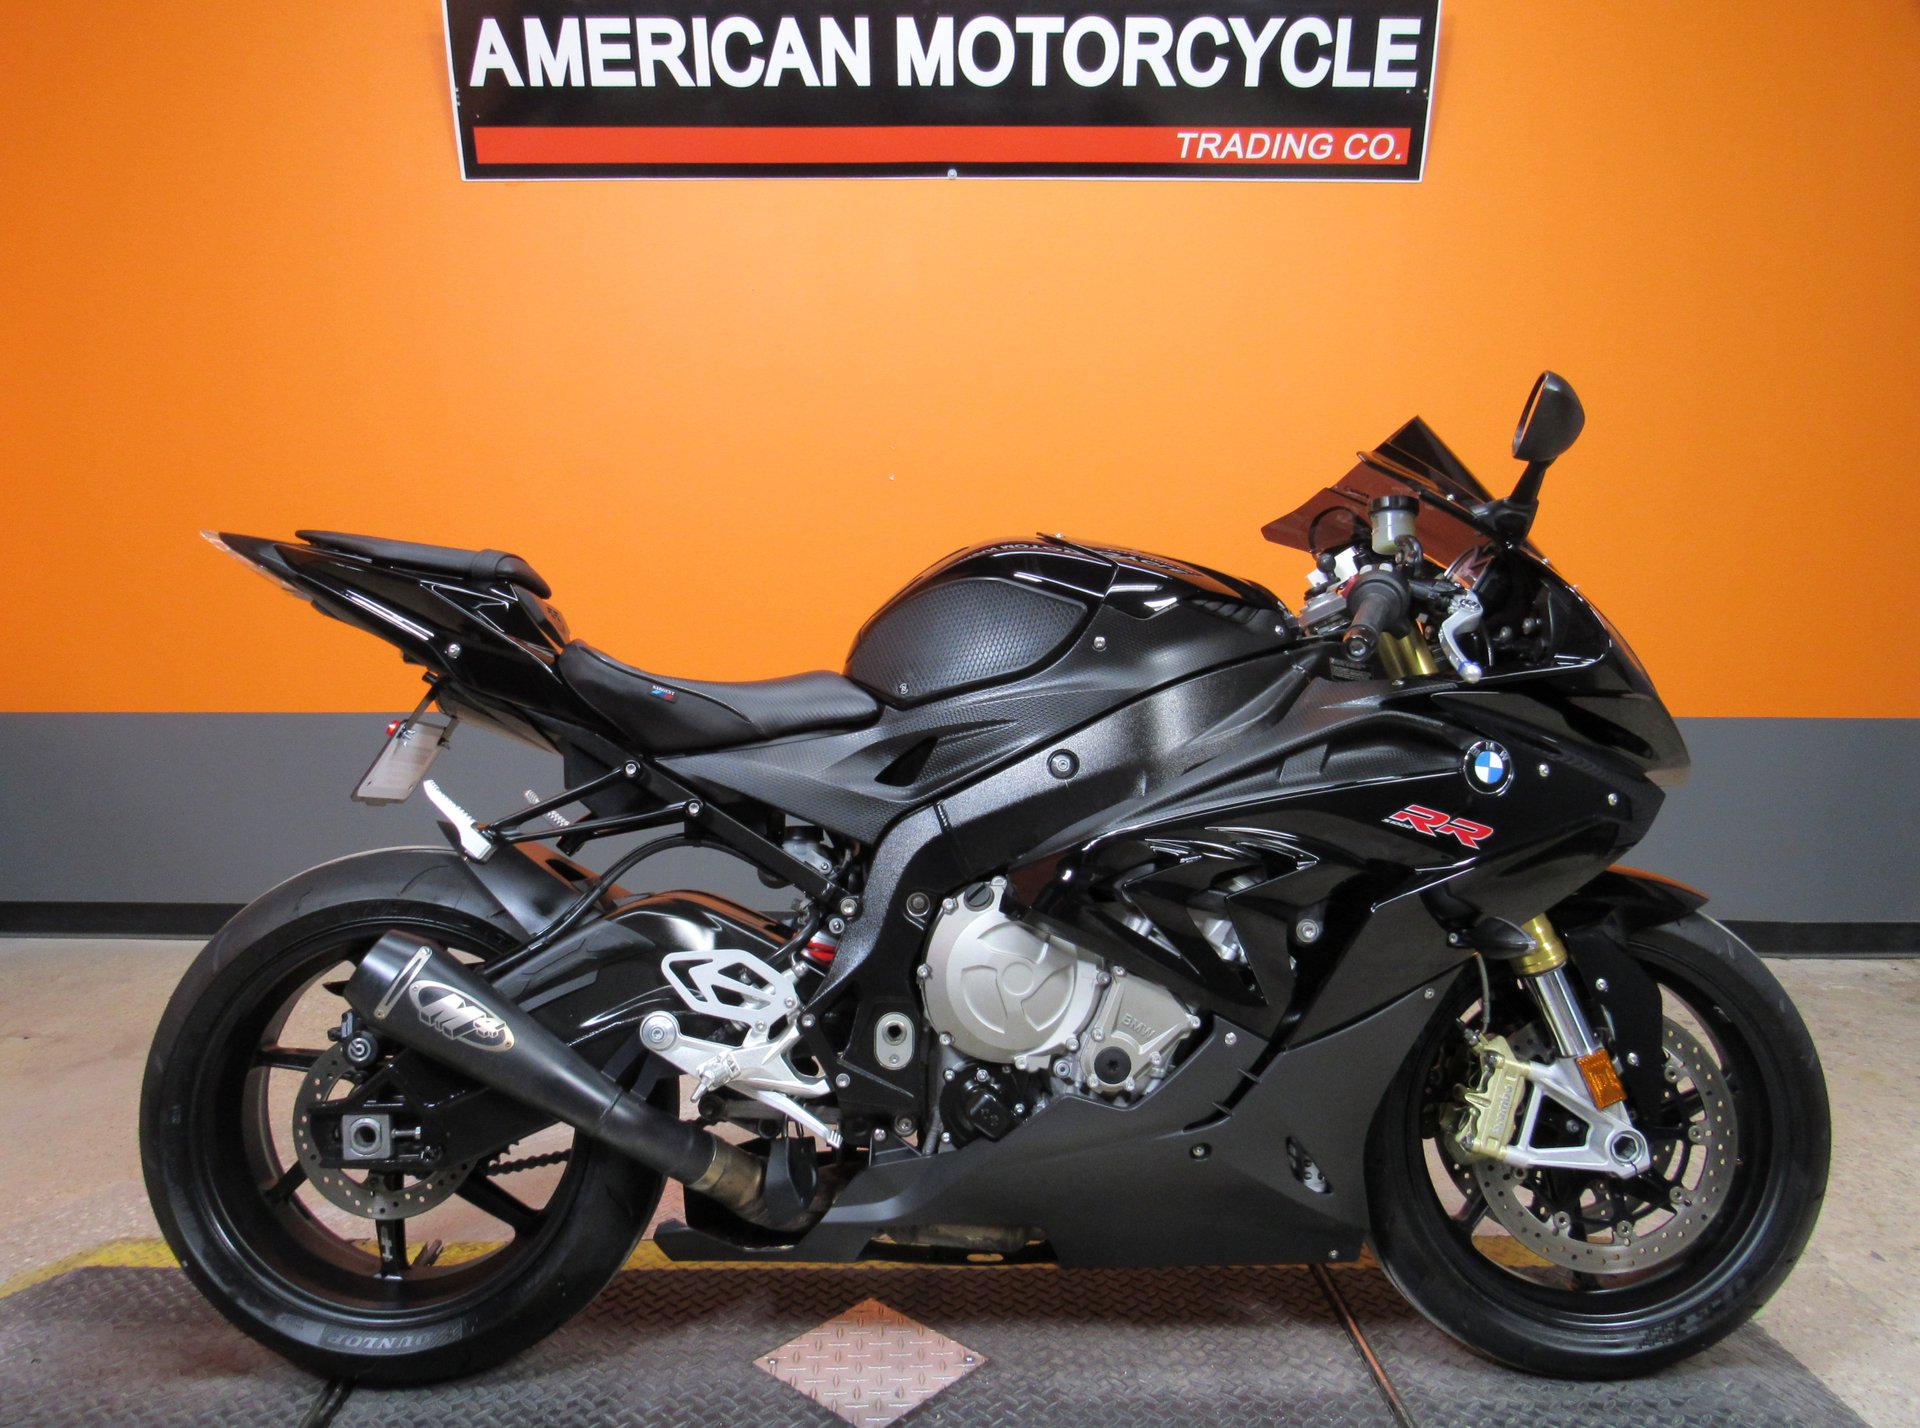 2016 BMW S1000RR | American Motorcycle Trading Company - Used Harley